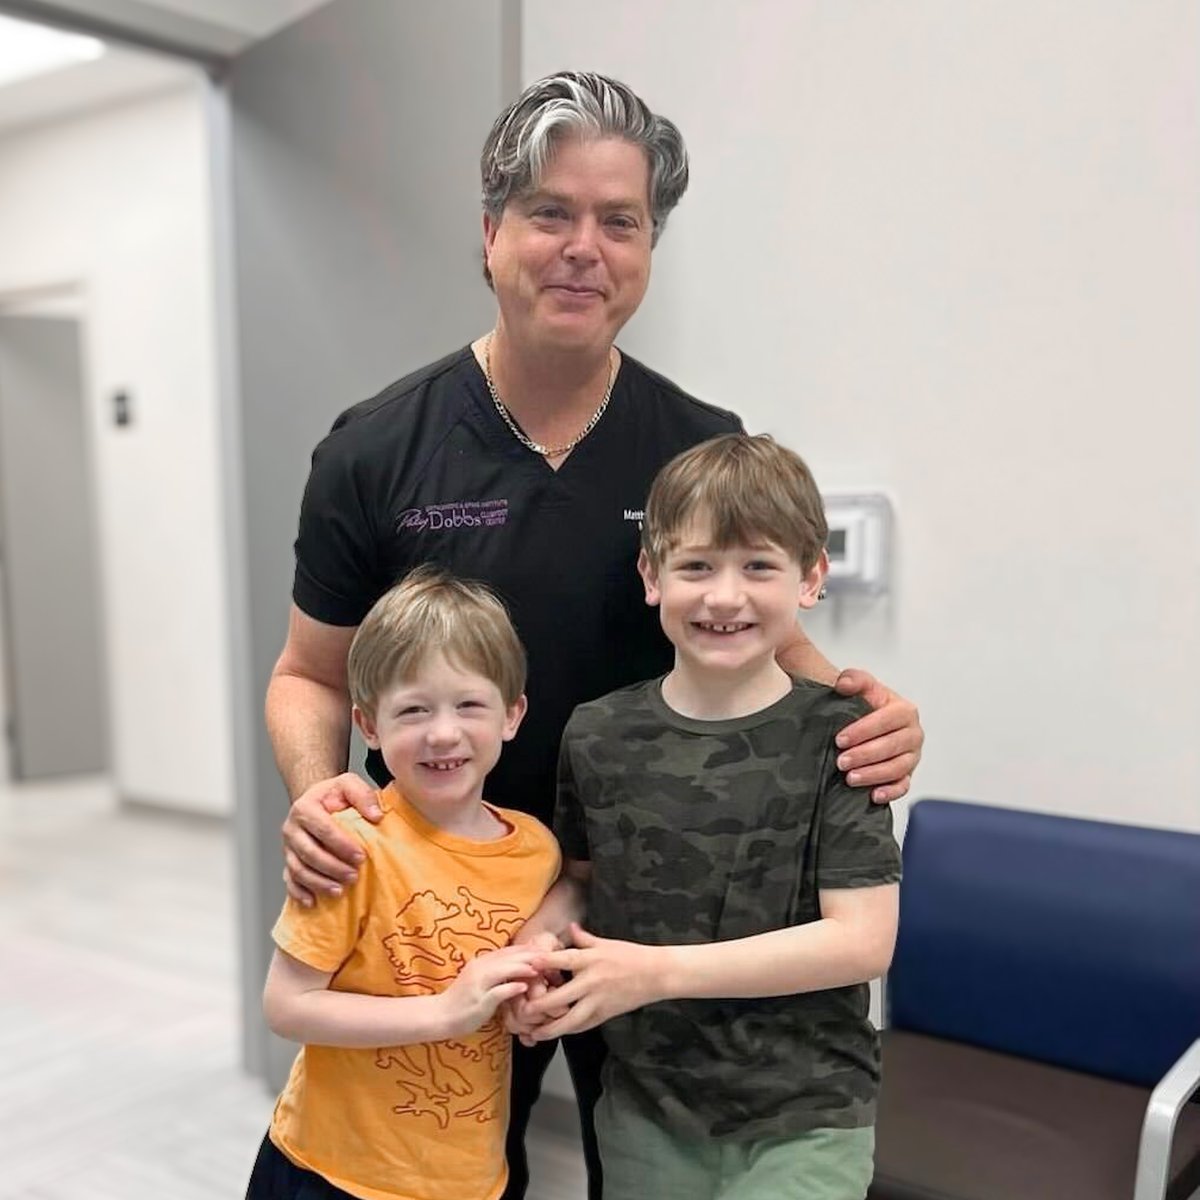 Children from across the globe journey to receive exceptional care from Dr. Matthew Dobbs. These two brothers, both successfully treated for clubfoot by Dr. Dobbs, showcase their radiant smiles. Their joy is a testament to his expertise and the life-changing impact of his work.